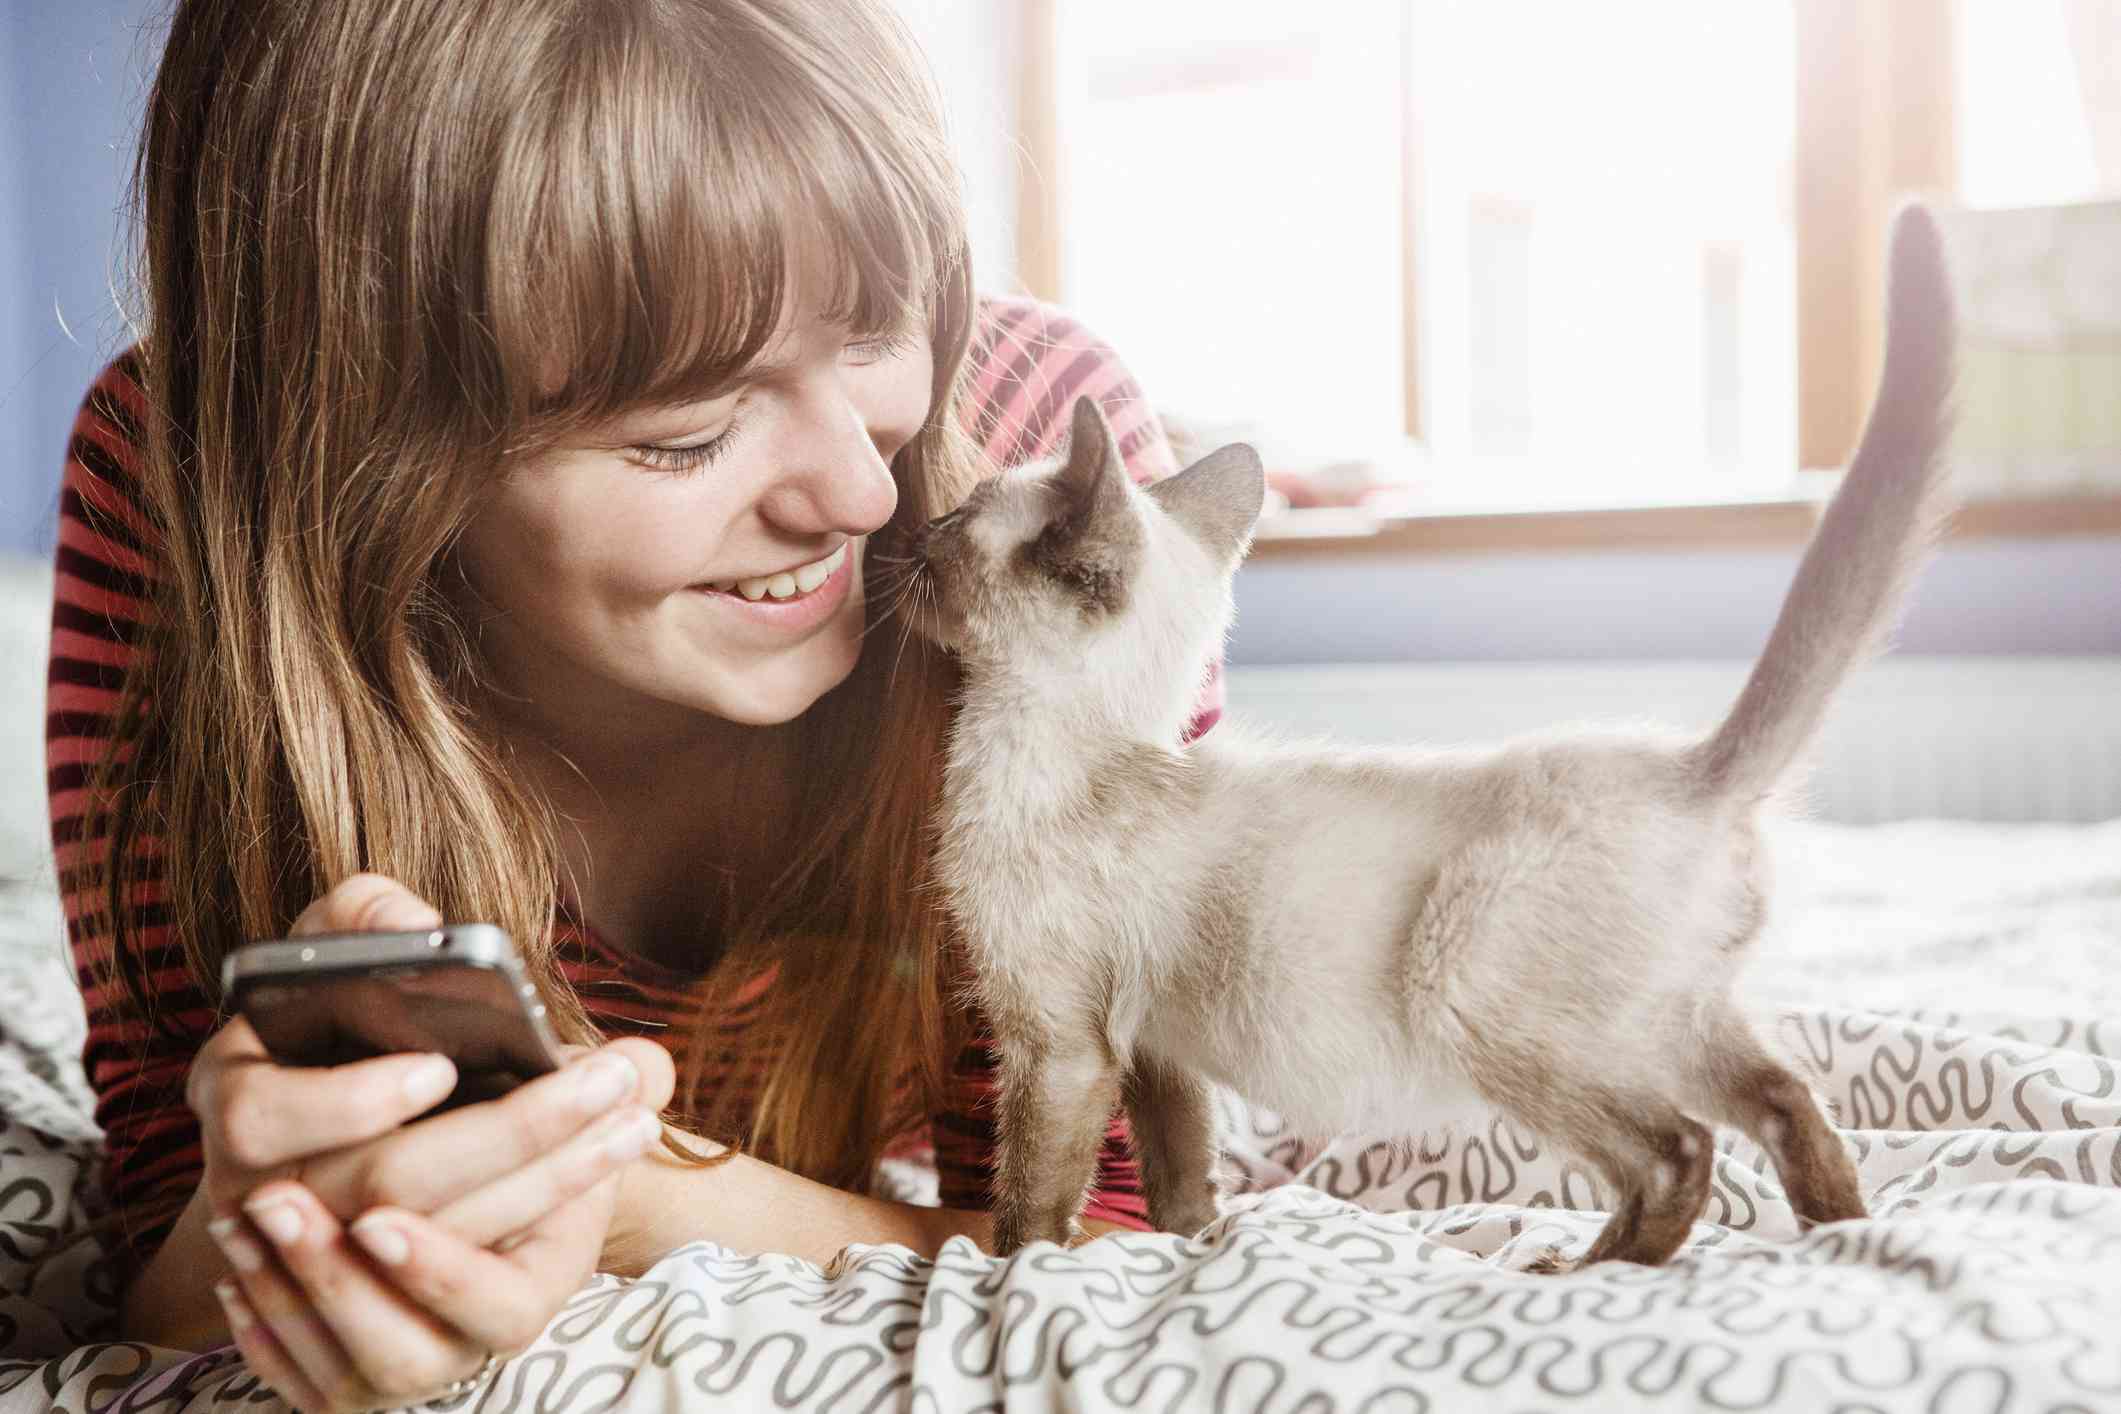 Young woman holding her phone and getting cuddles from a kitten.